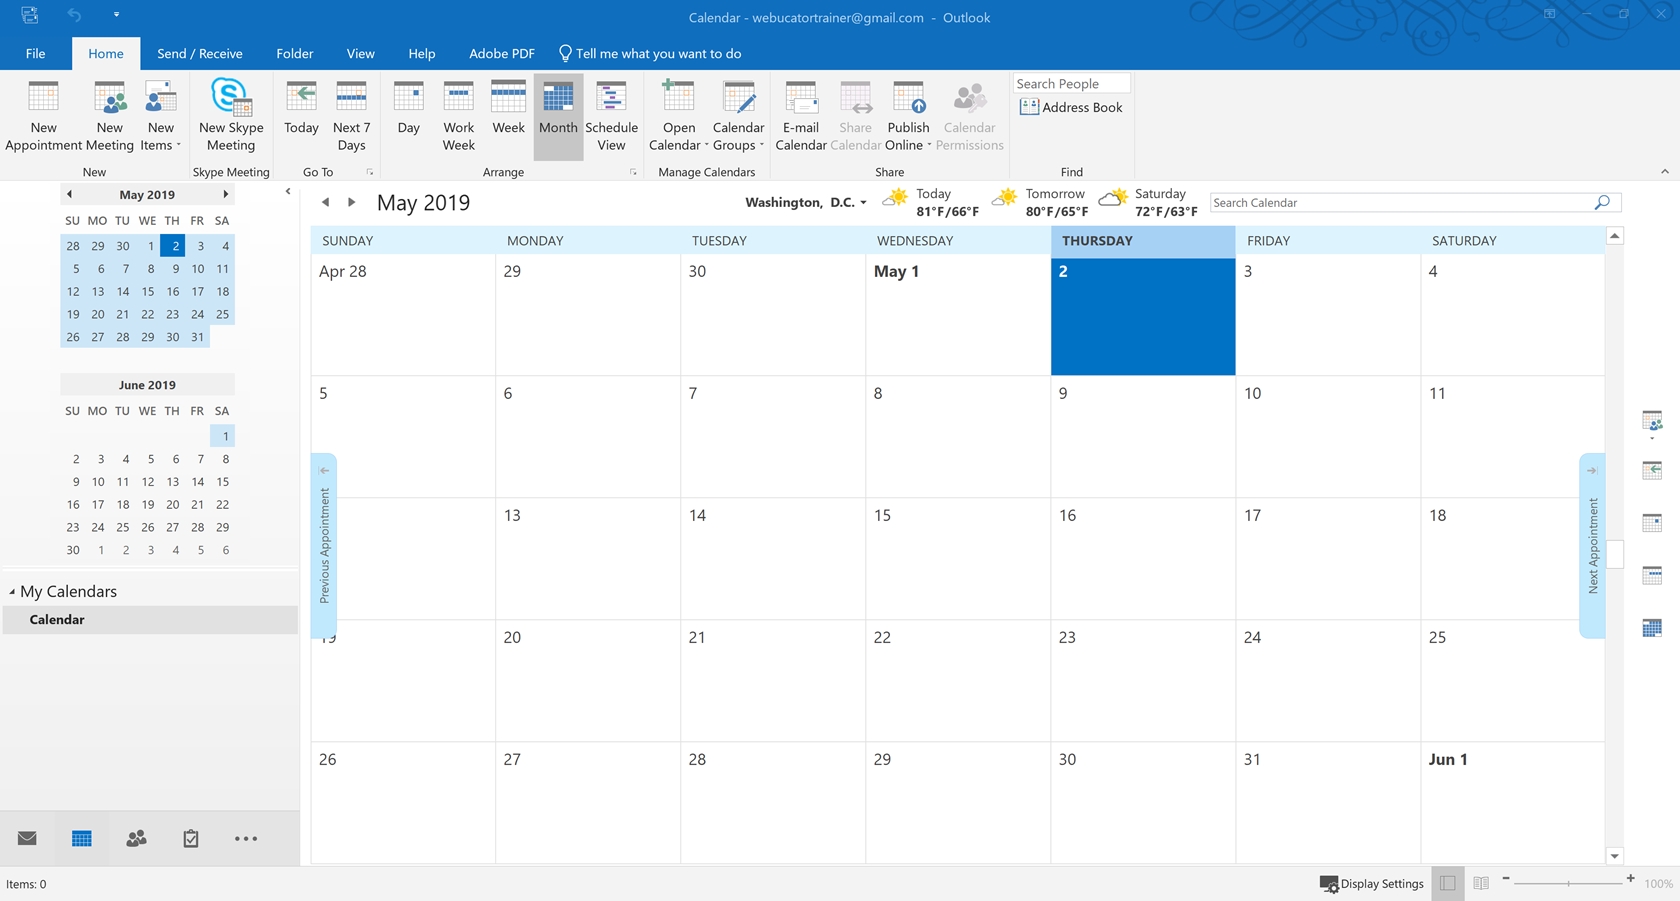 Tutorial: Working With The Calendar | Introduction To